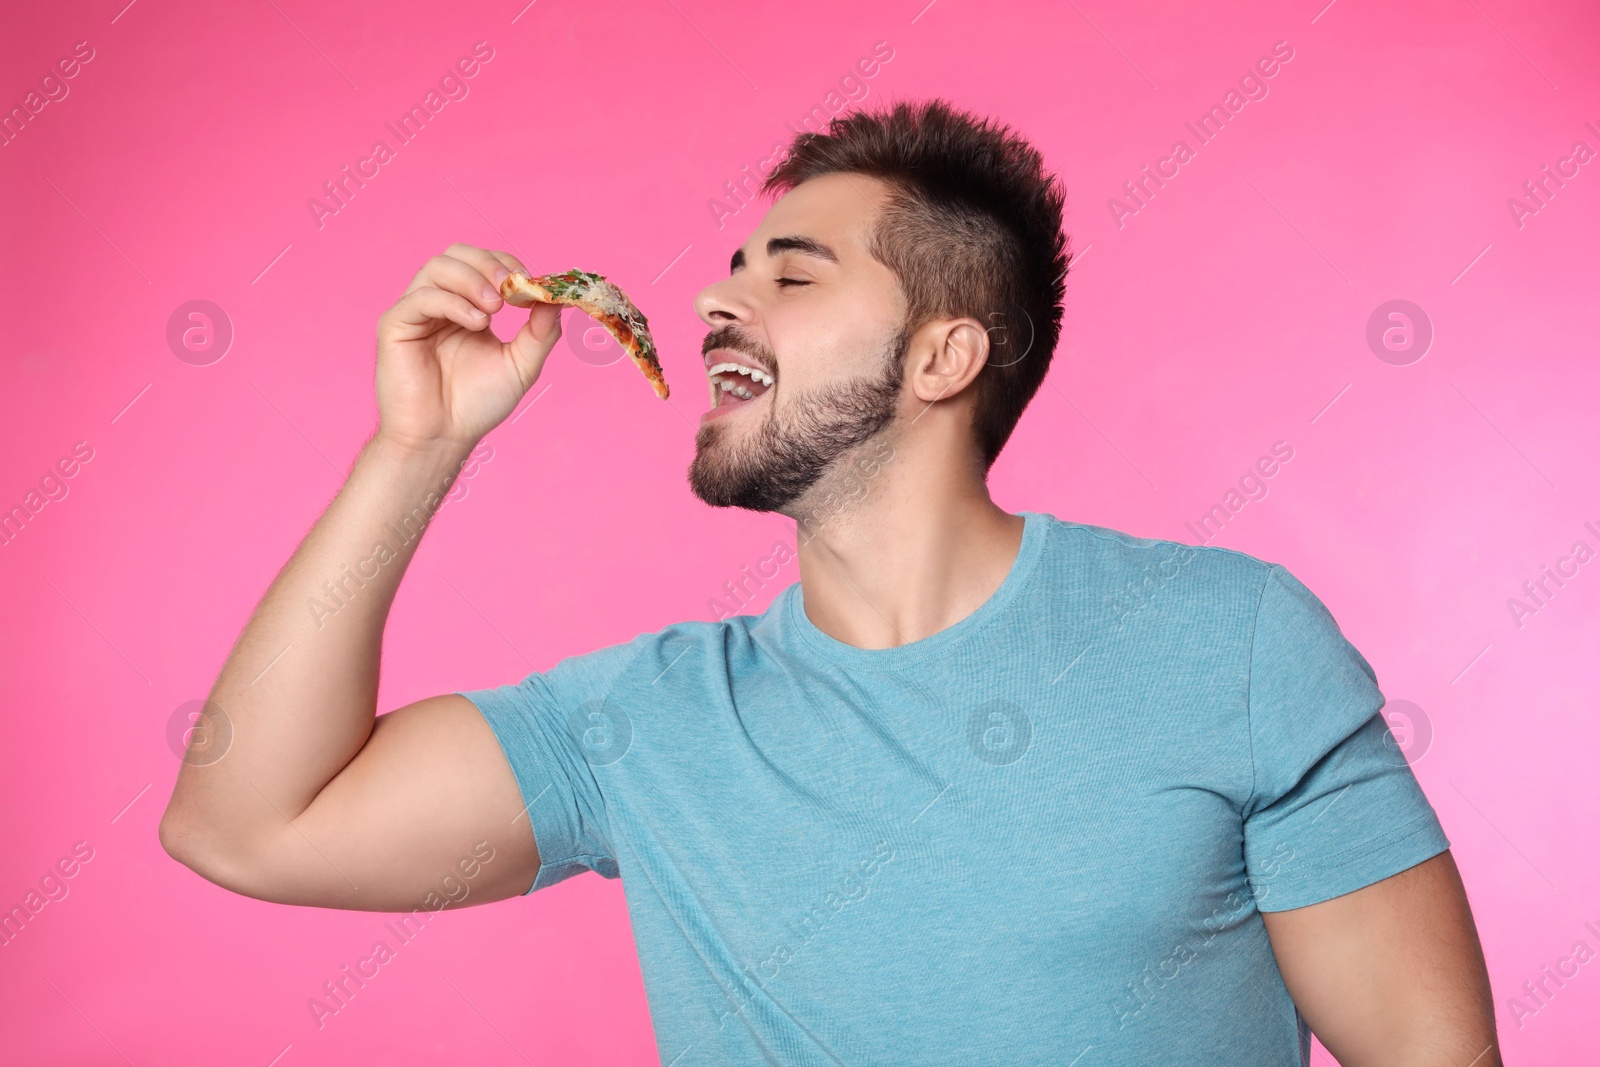 Photo of Handsome man eating pizza on pink background